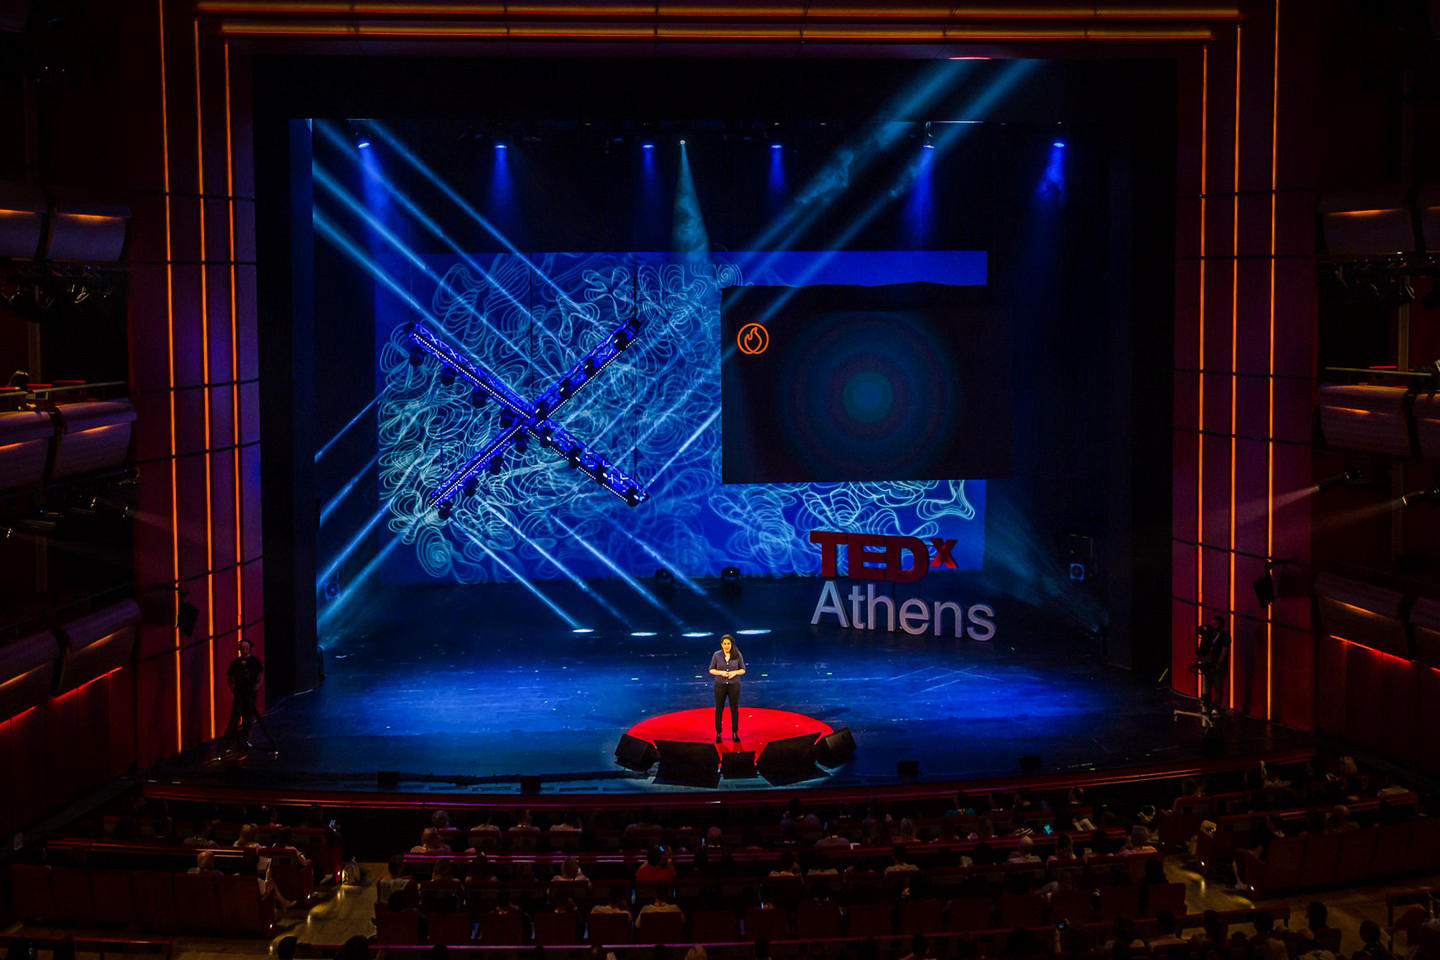 TEDx - #tedxathens 2019 in Athens, Greece, tests just how many Xs one TEDx stage can include